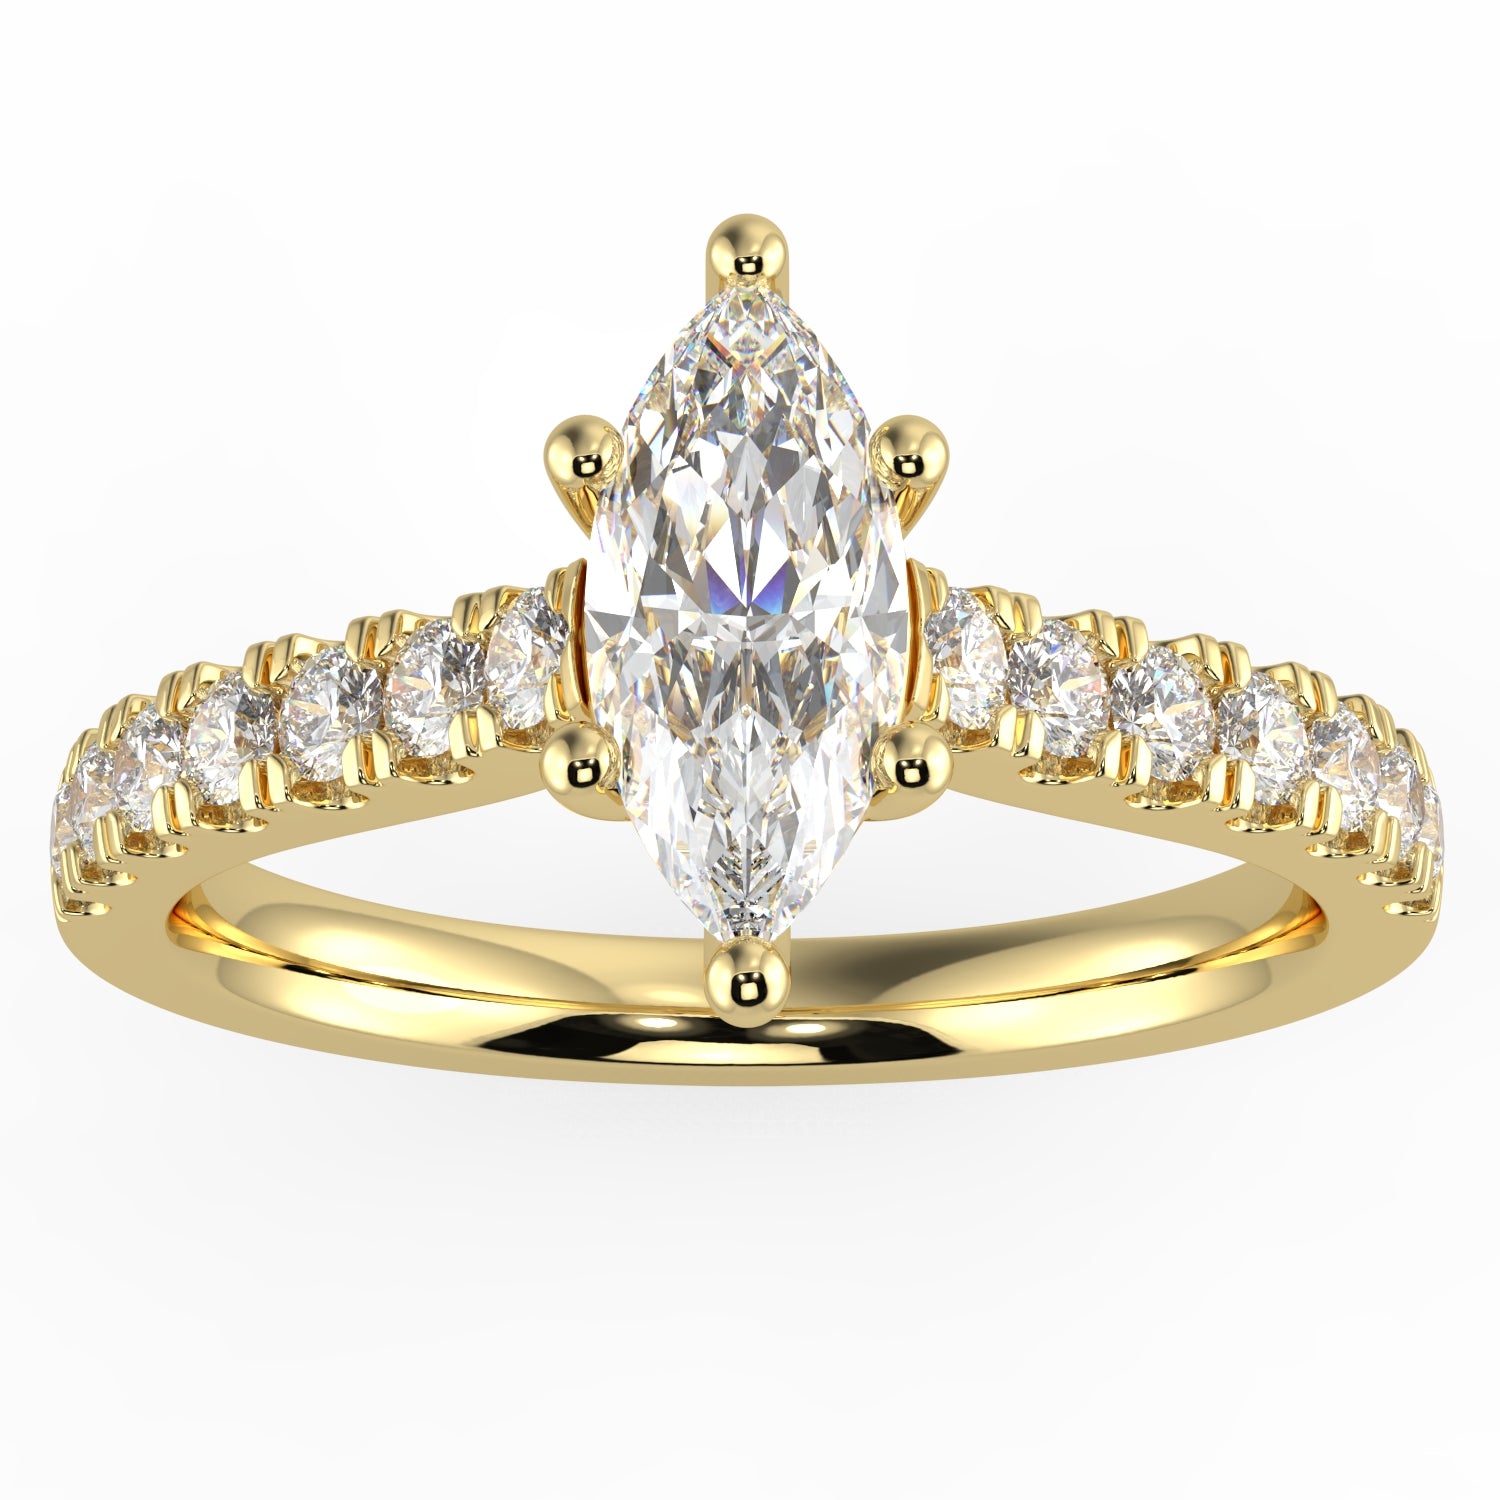 Natural Diamond Slim Shank Ring with 0.70ctw Marquise Shape Center & 0.30 Round Side GHS1 Stones Set on 14K Gold